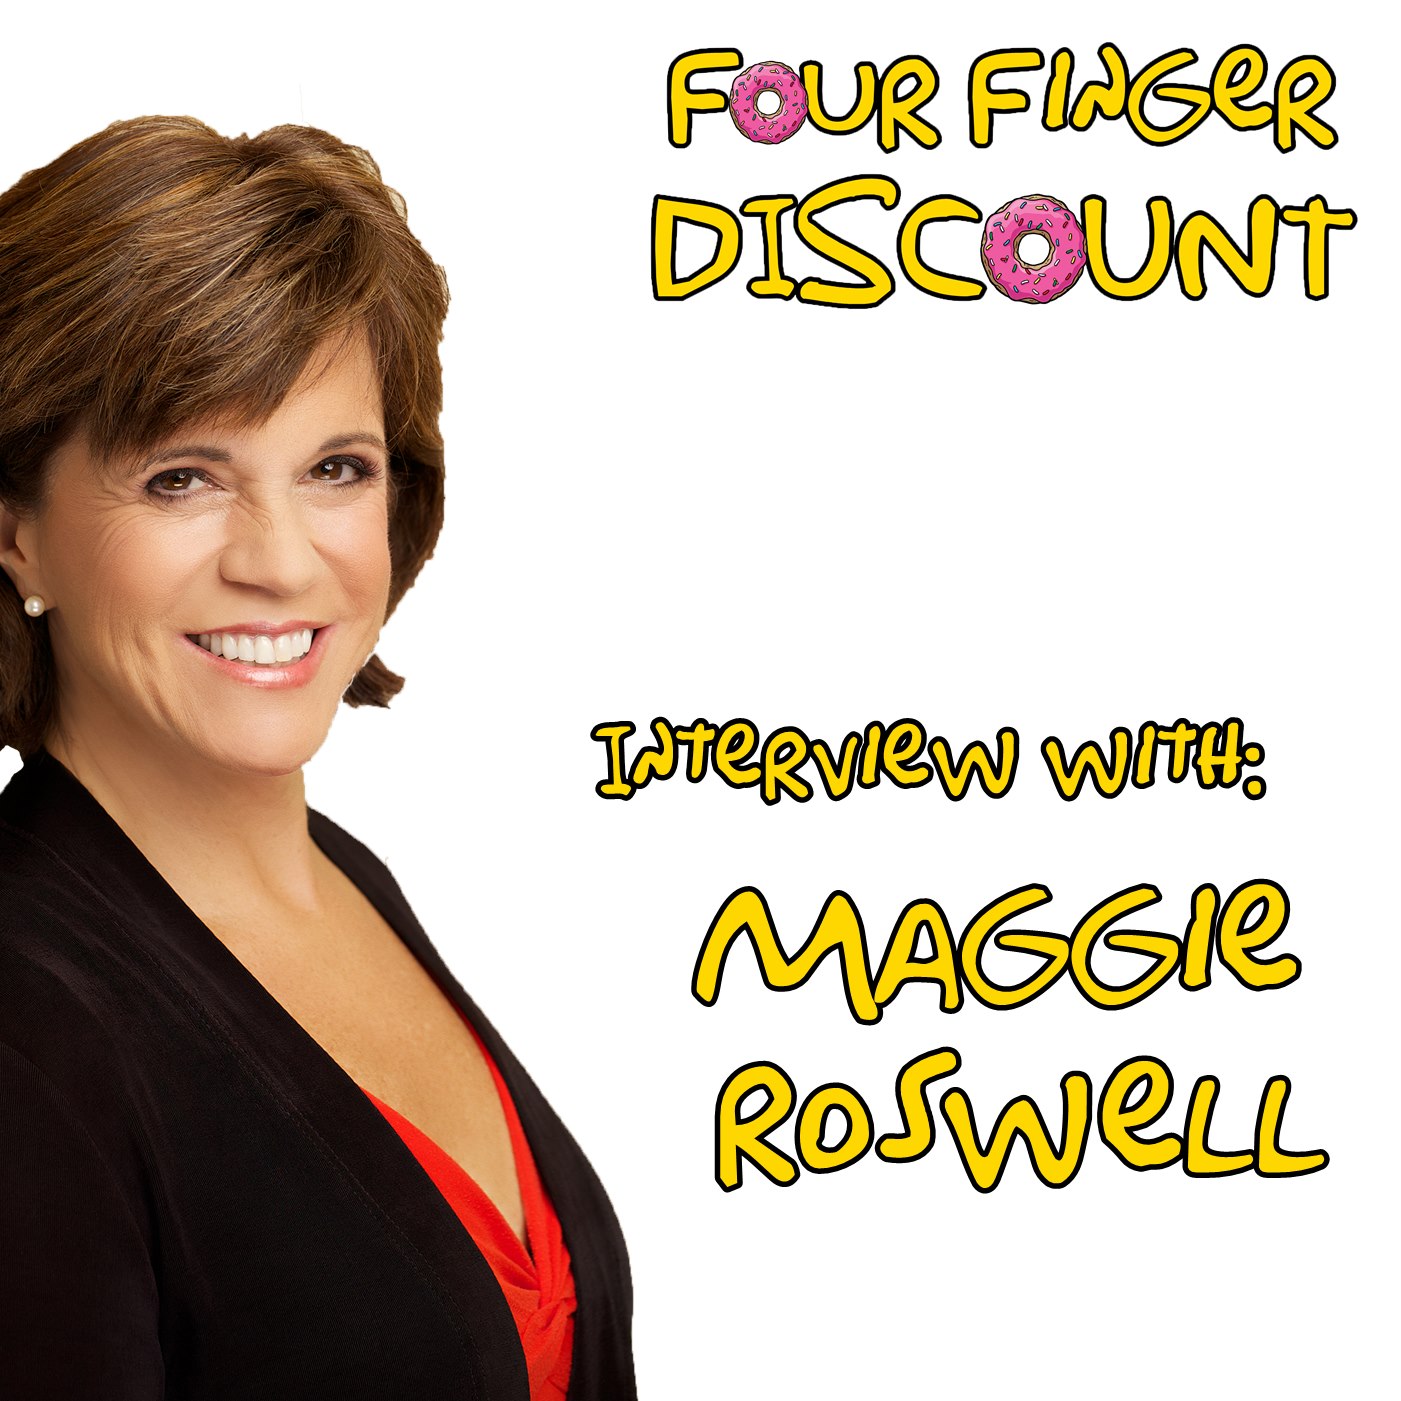 Interview With Maggie Roswell